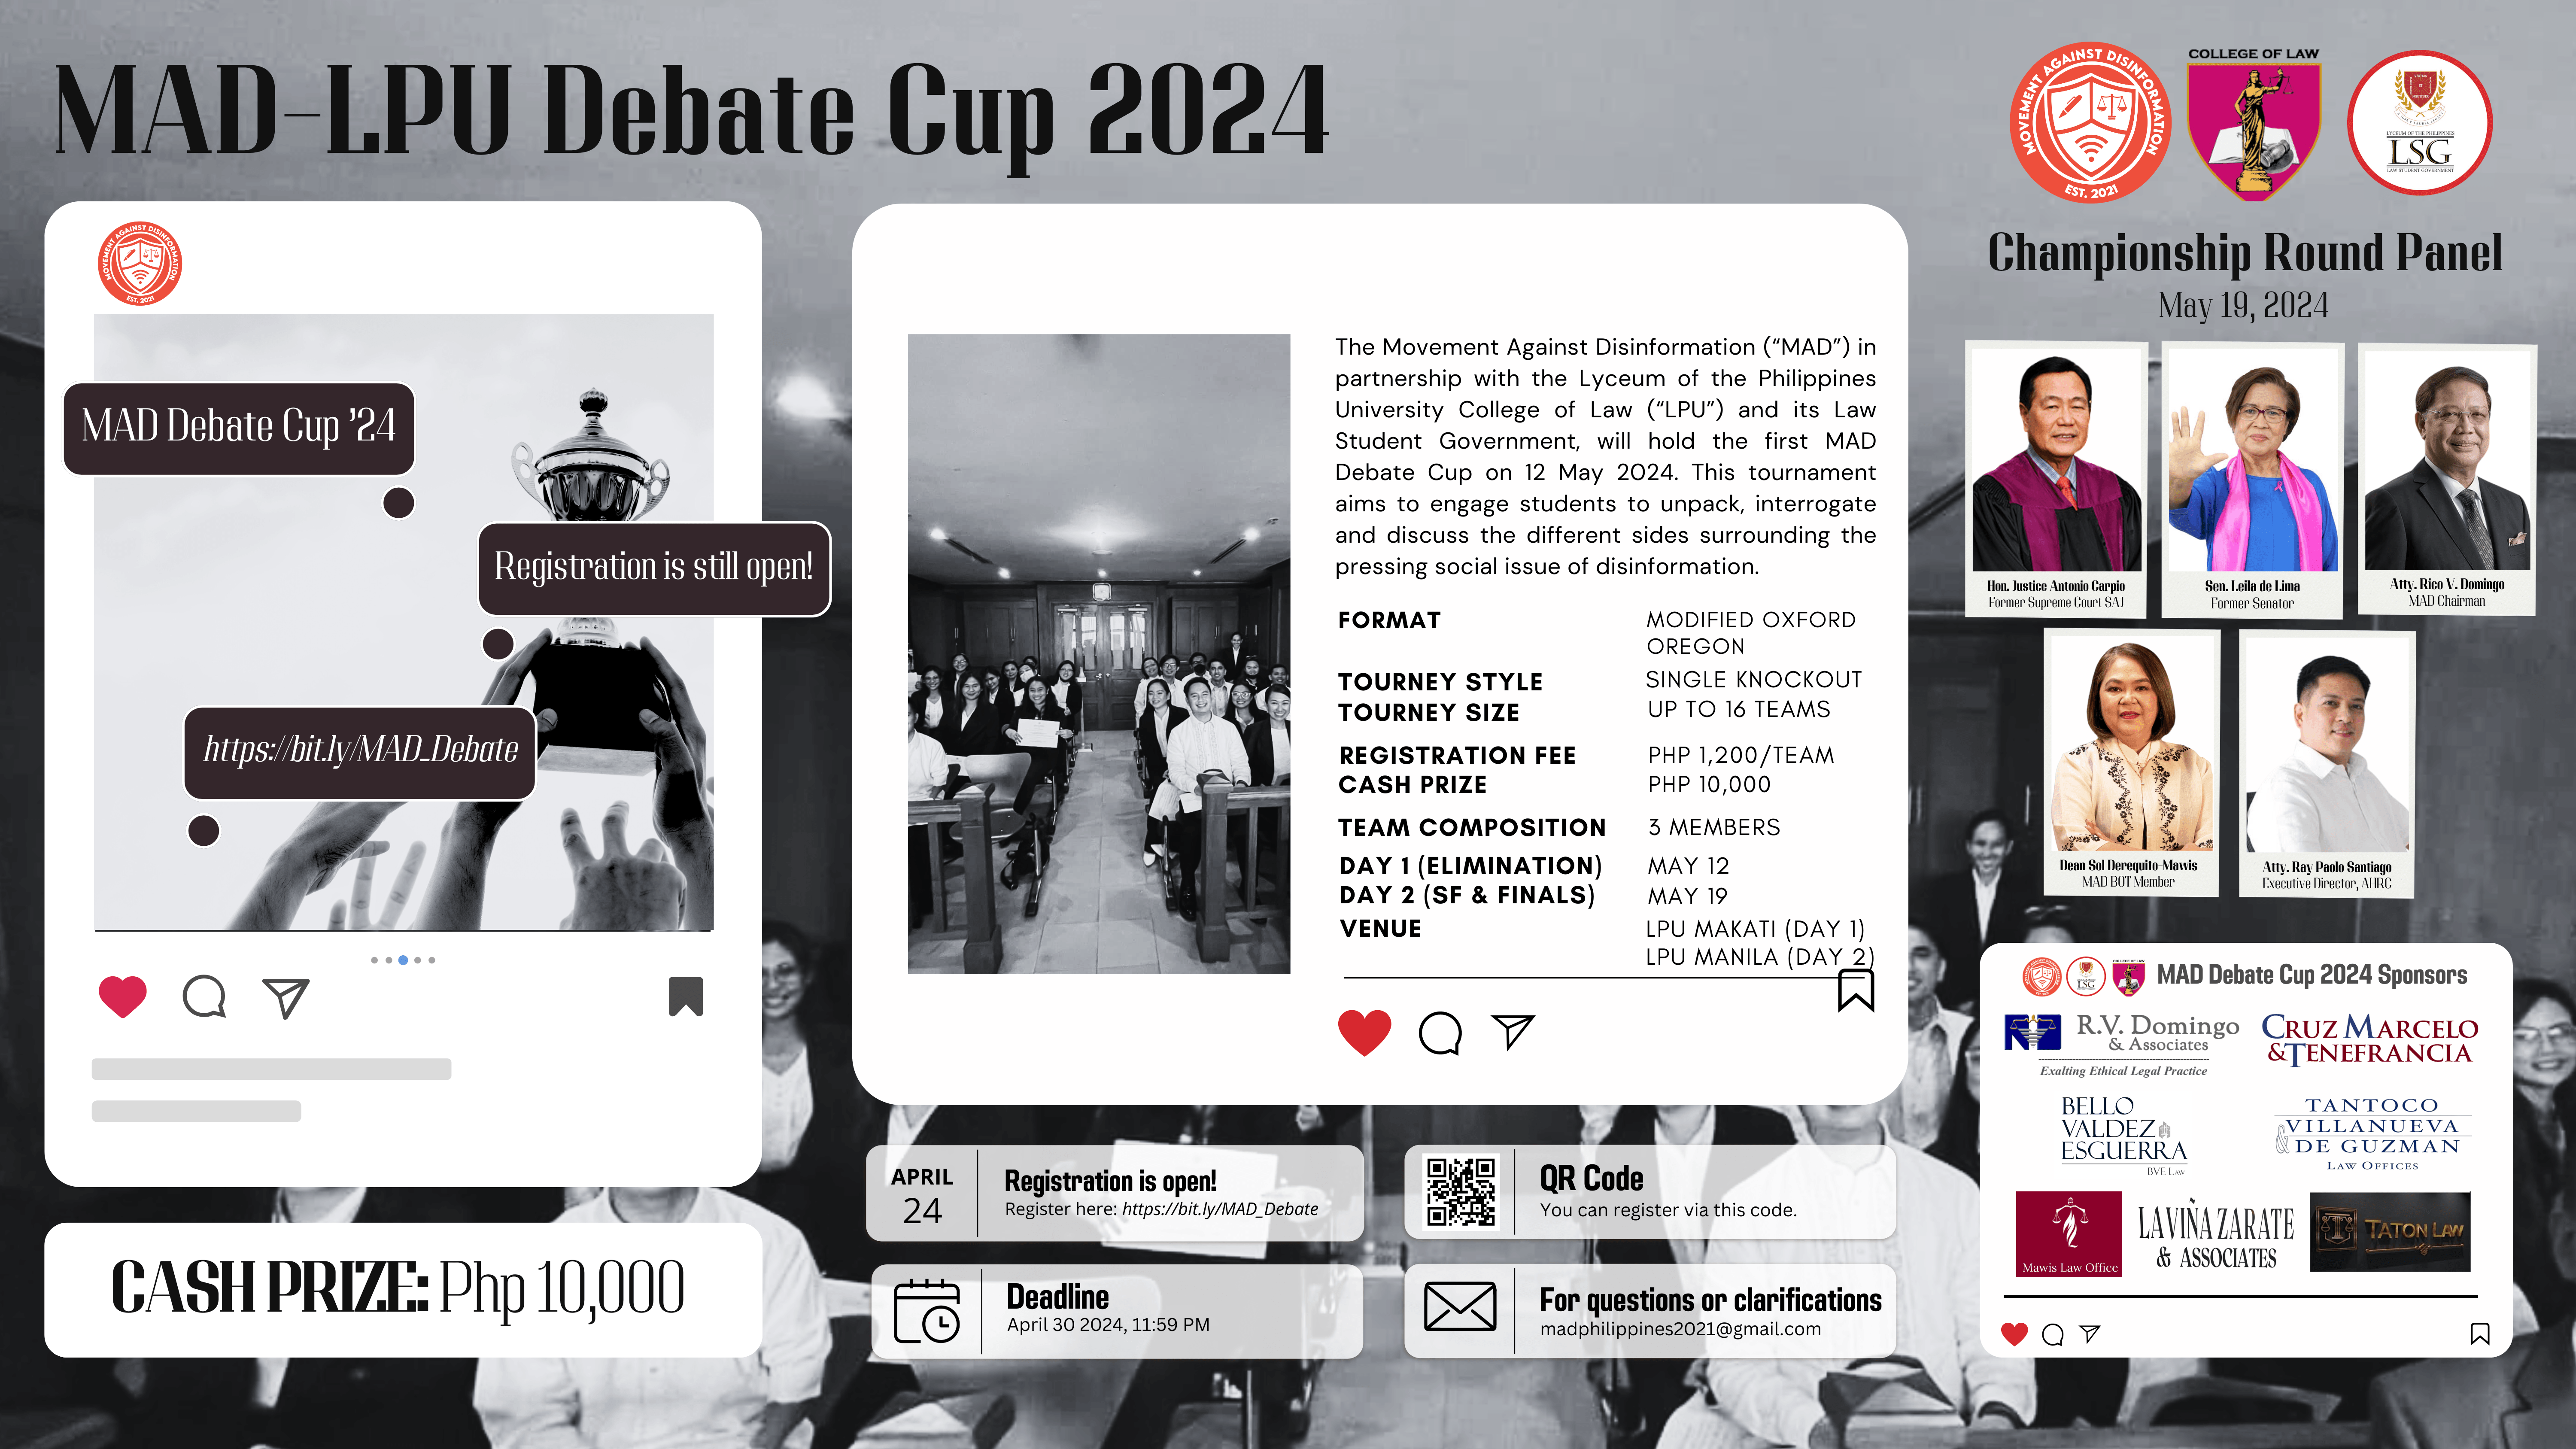 Call for participants: MAD Debate Cup 2024